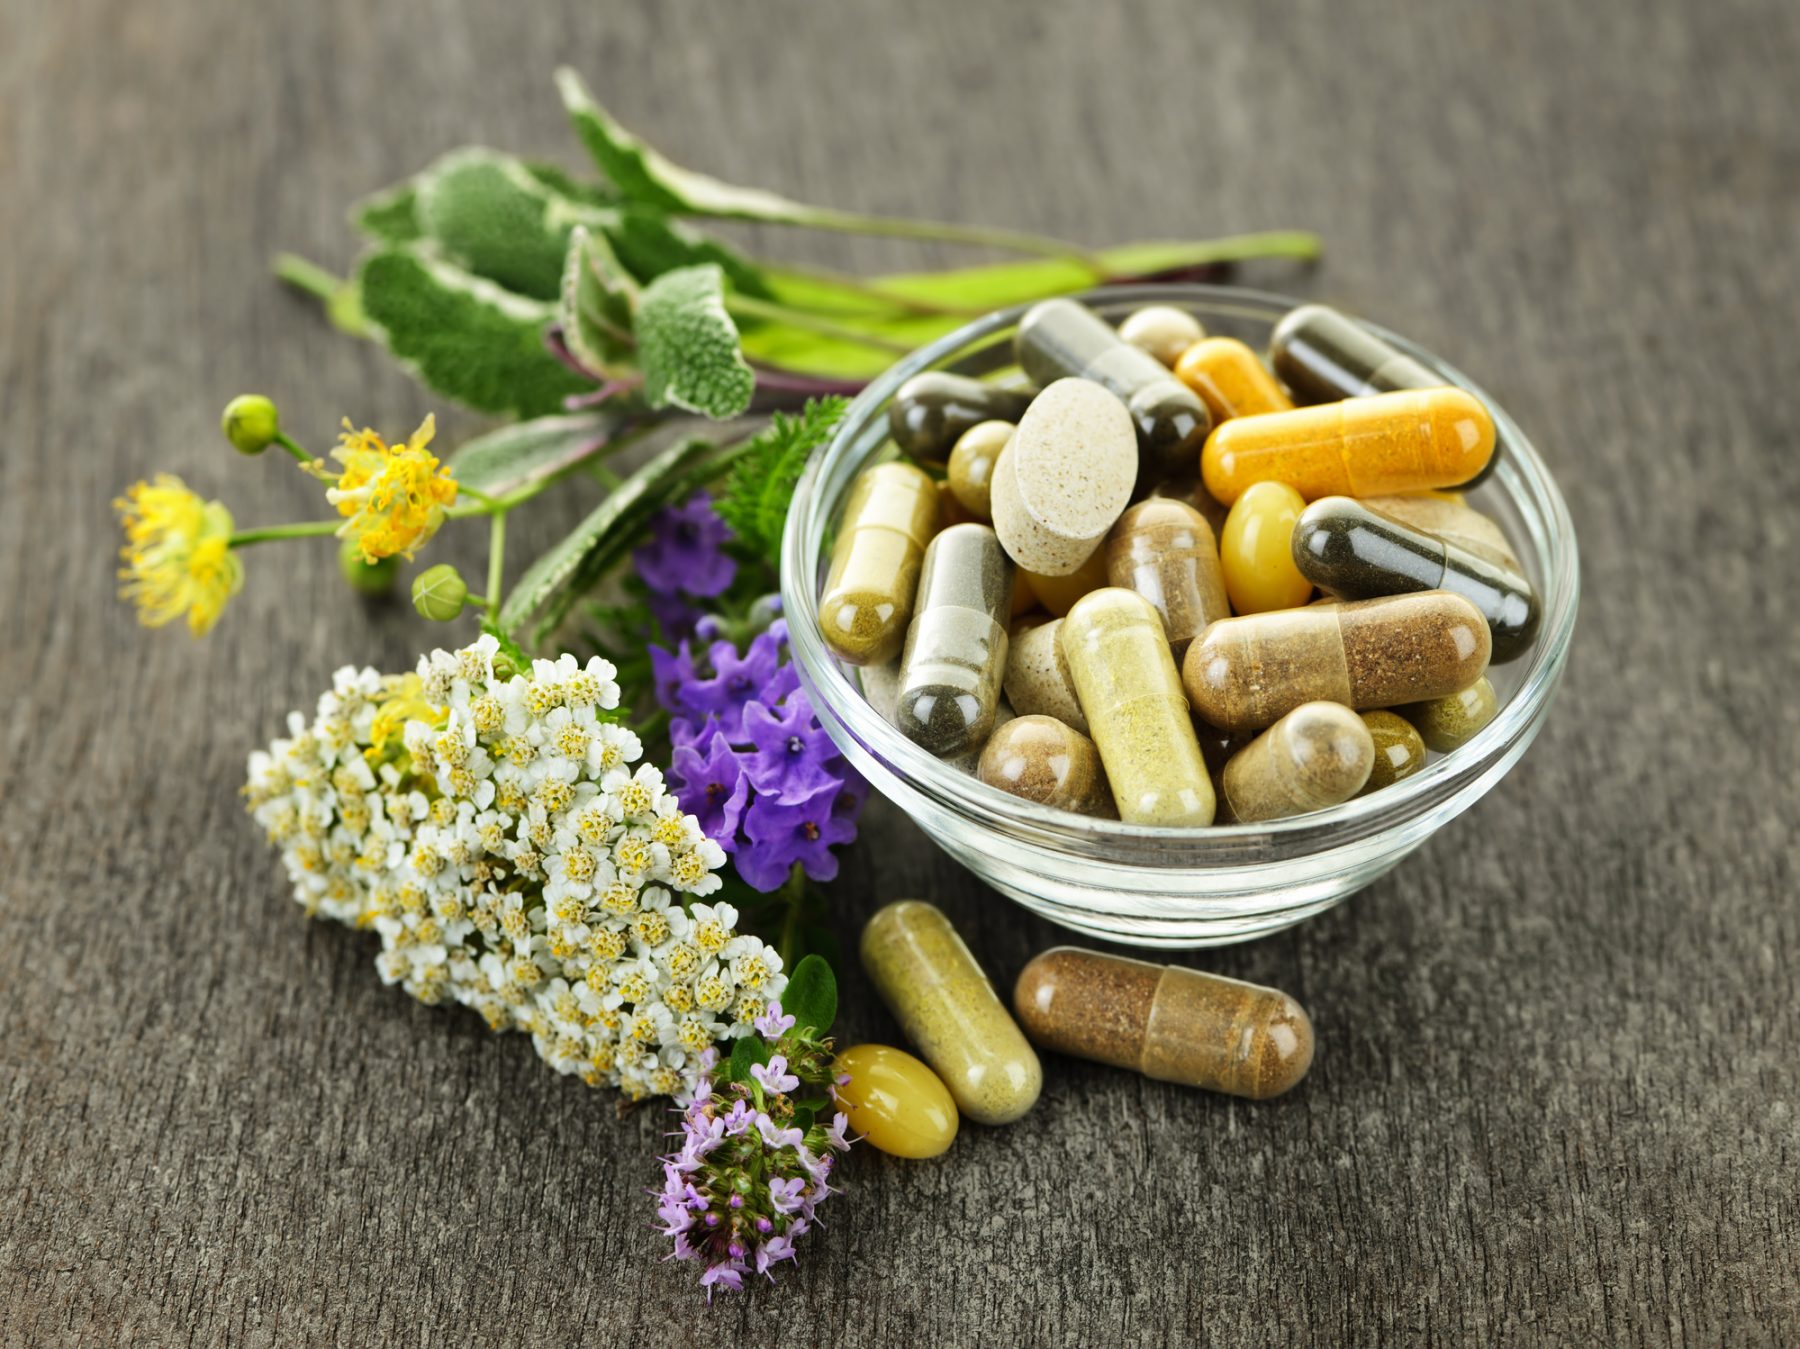 Herbal medicine, herbs, vitamins, and supplements in a bowl